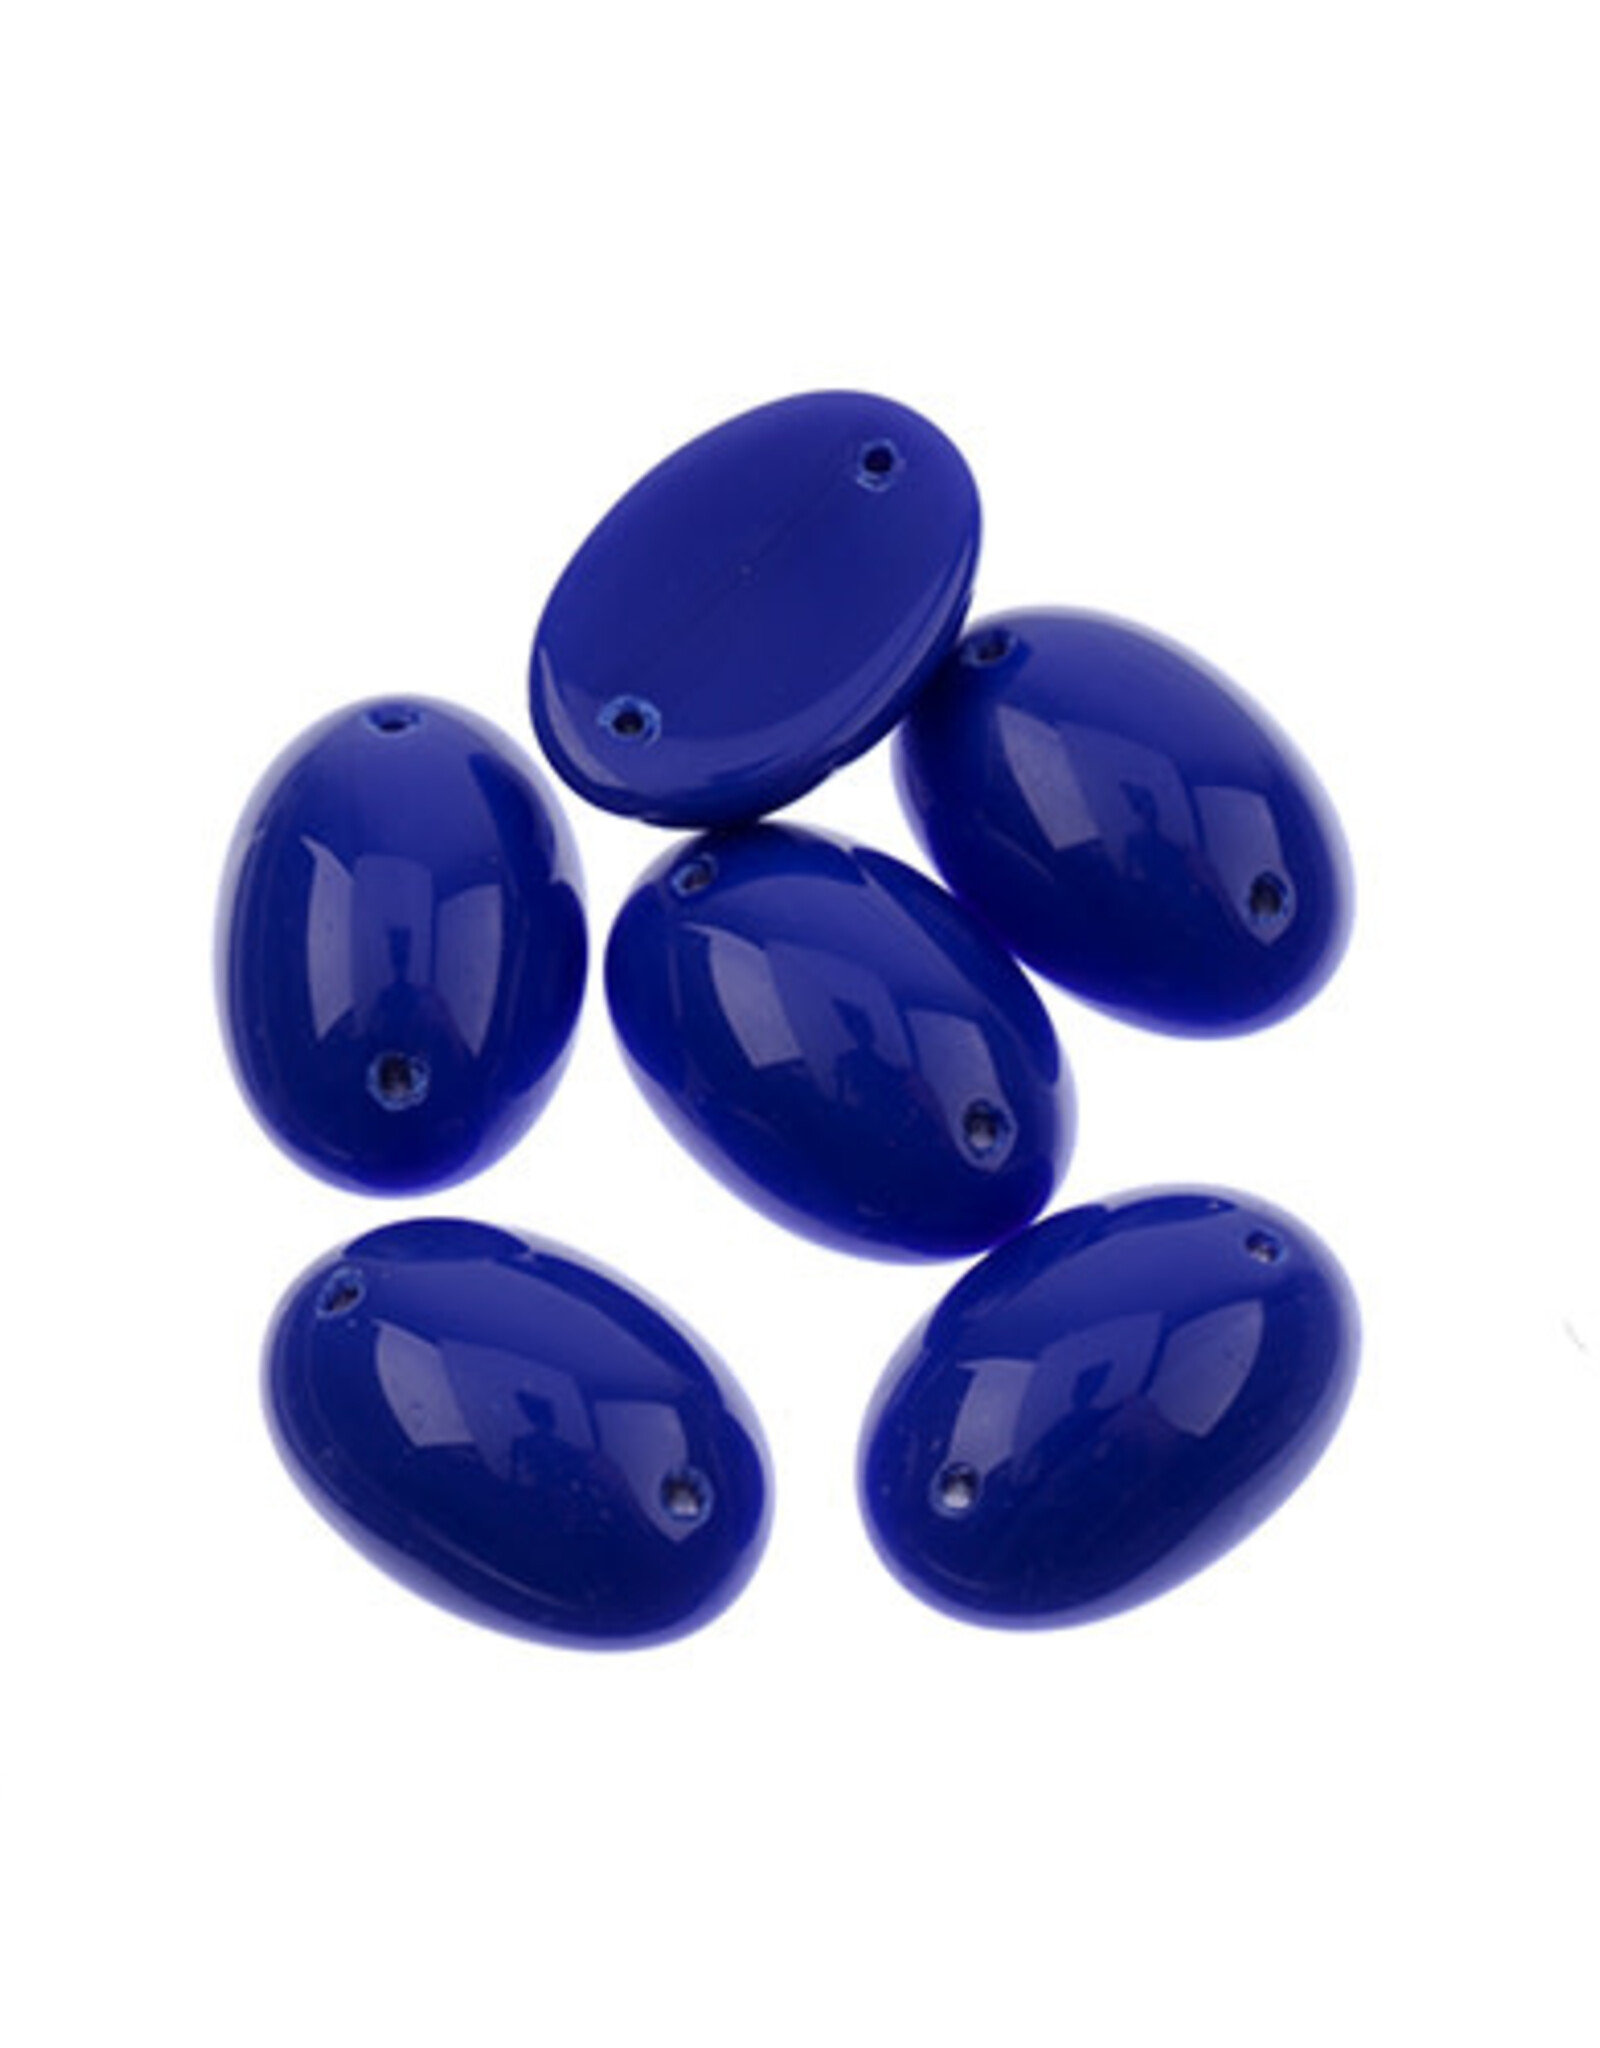 Craft Supplies Glass 2 Hole Cabochon 18x13mm Oval Opaque Navy 6pc